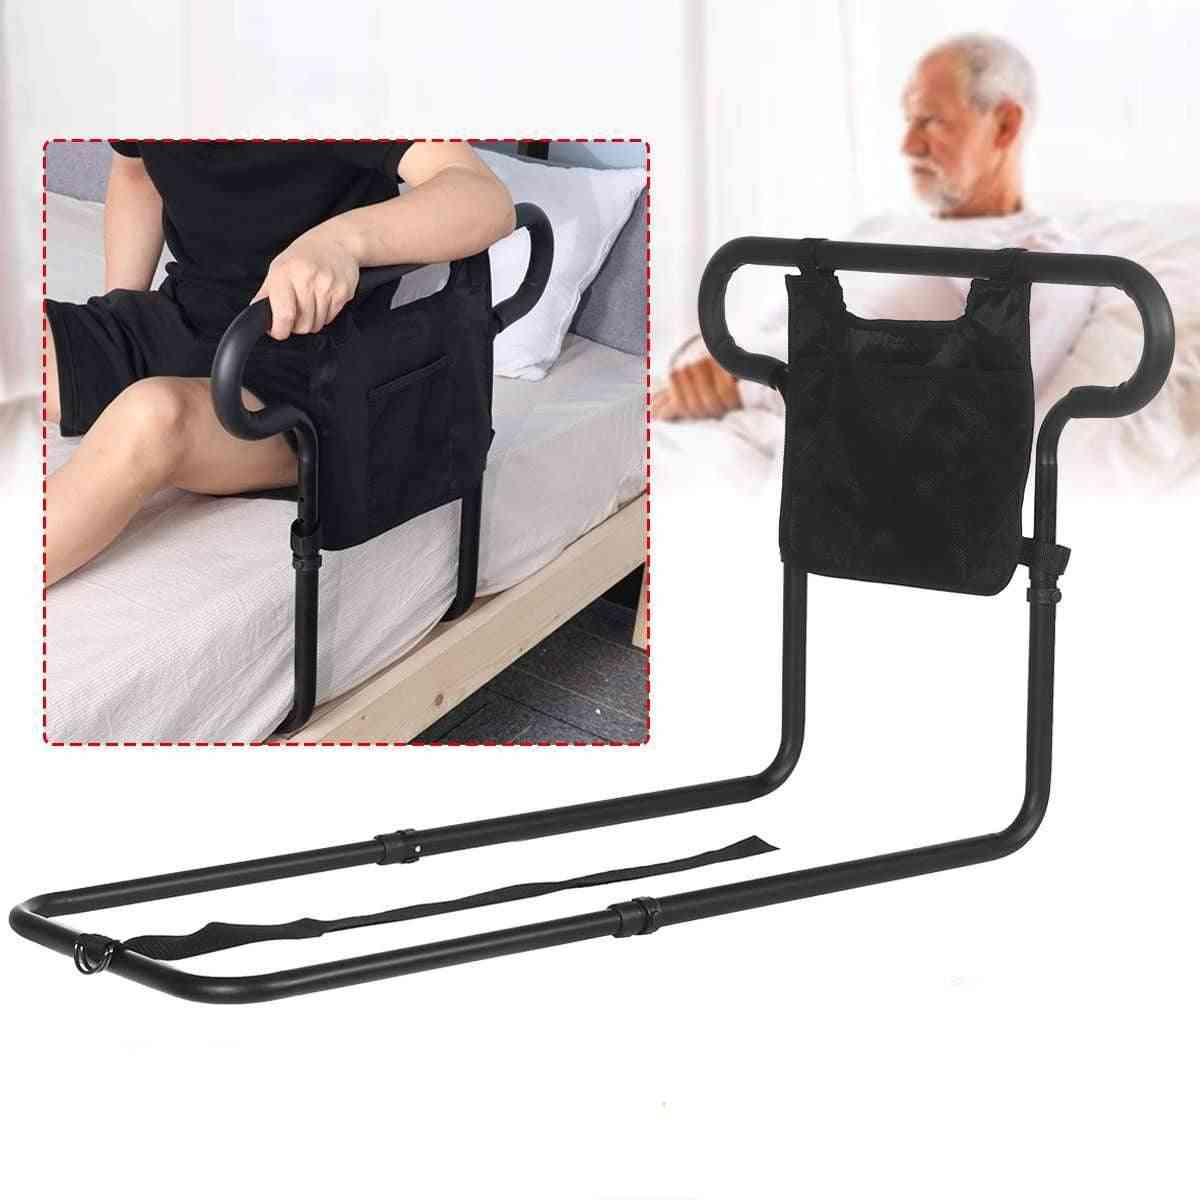 Handle Secure Bed Rail Bedroom Safety Fall Prevention Aid